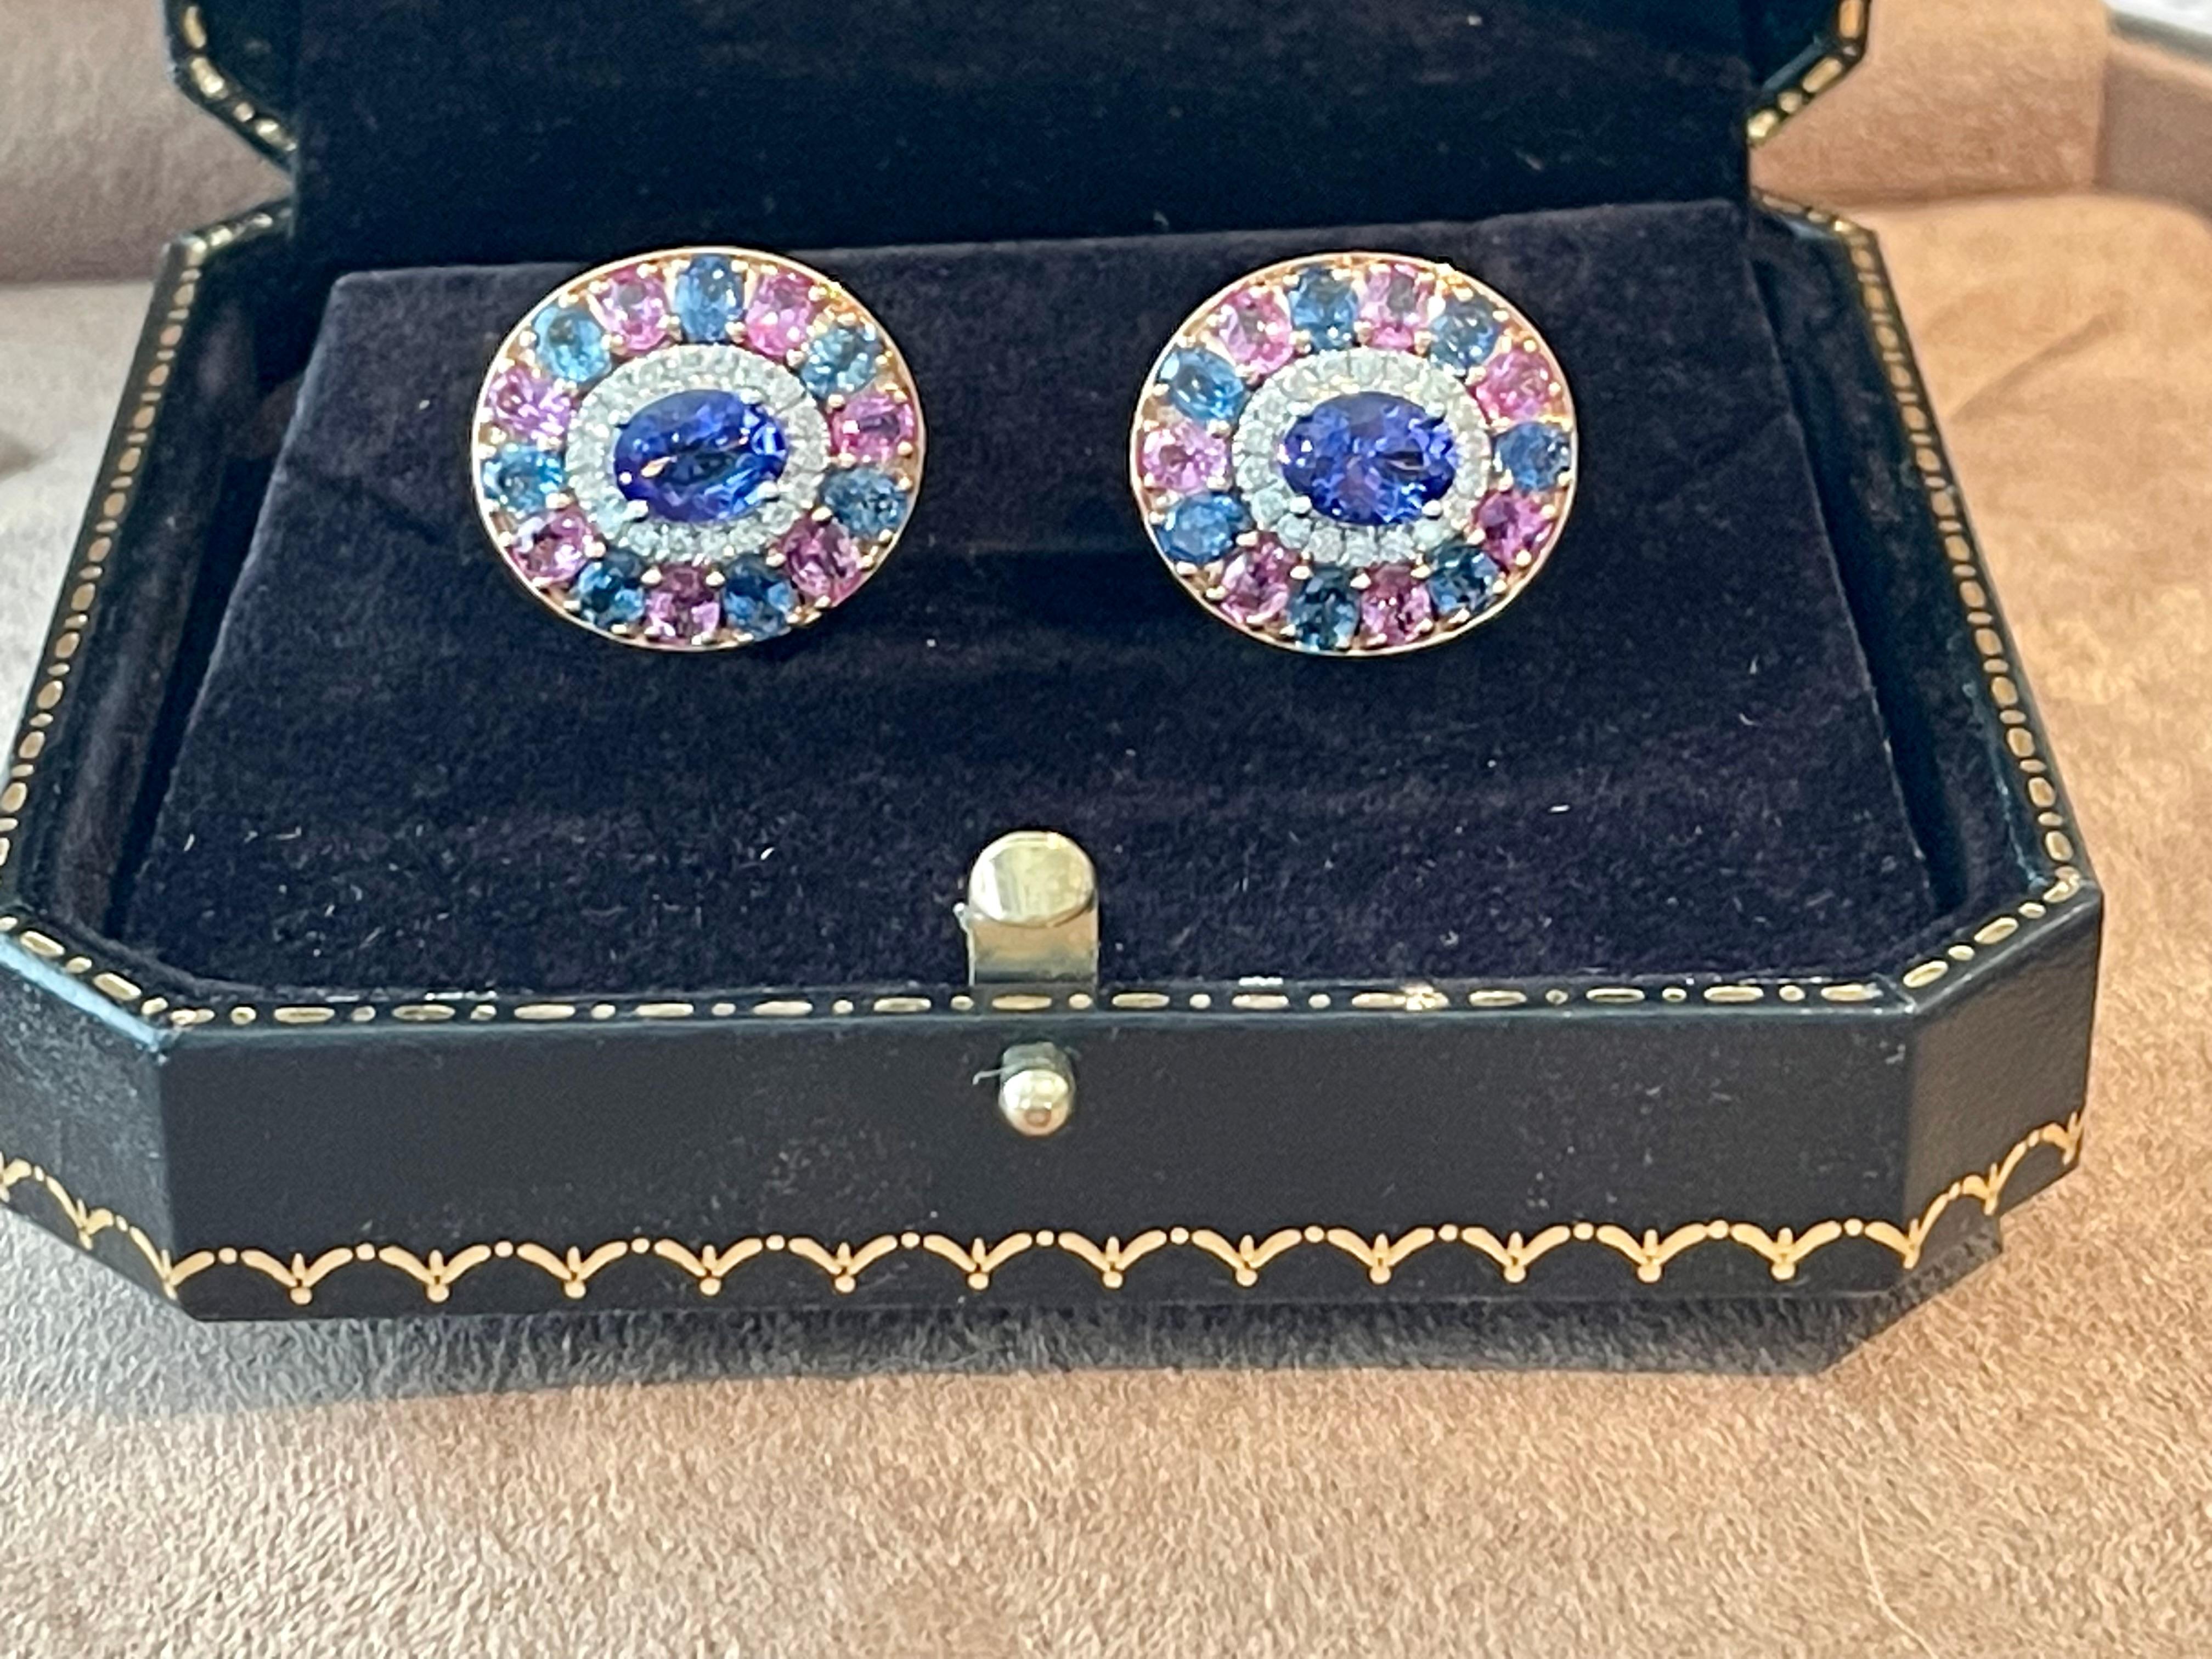 18k Rose Gold Cluster Earrings Tanzanite Pink Sappire Blue Sapphire Diamond For Sale 2